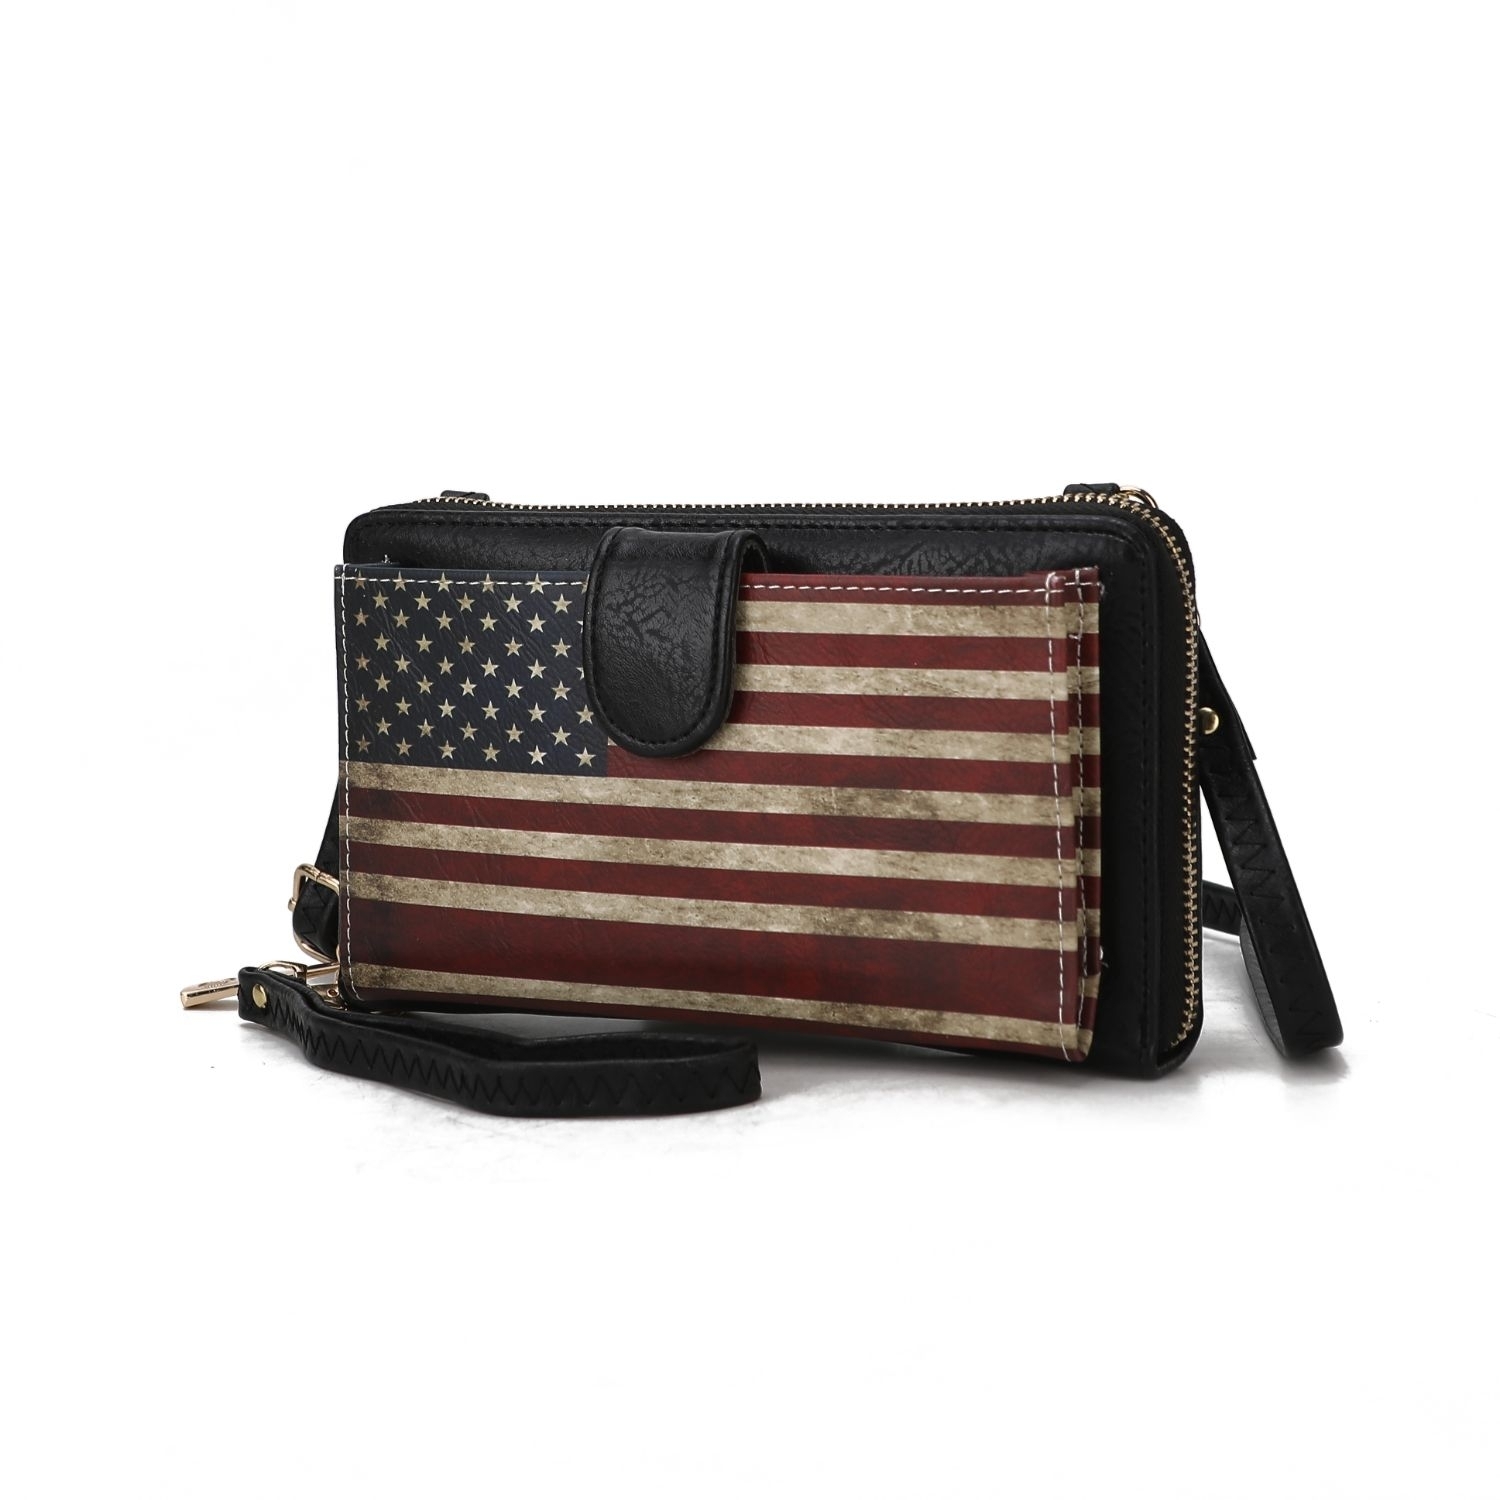 MKF Collection Kiara Smartphone And Wallet Convertible FLAG Crossbody Bag By Mia K - Beige